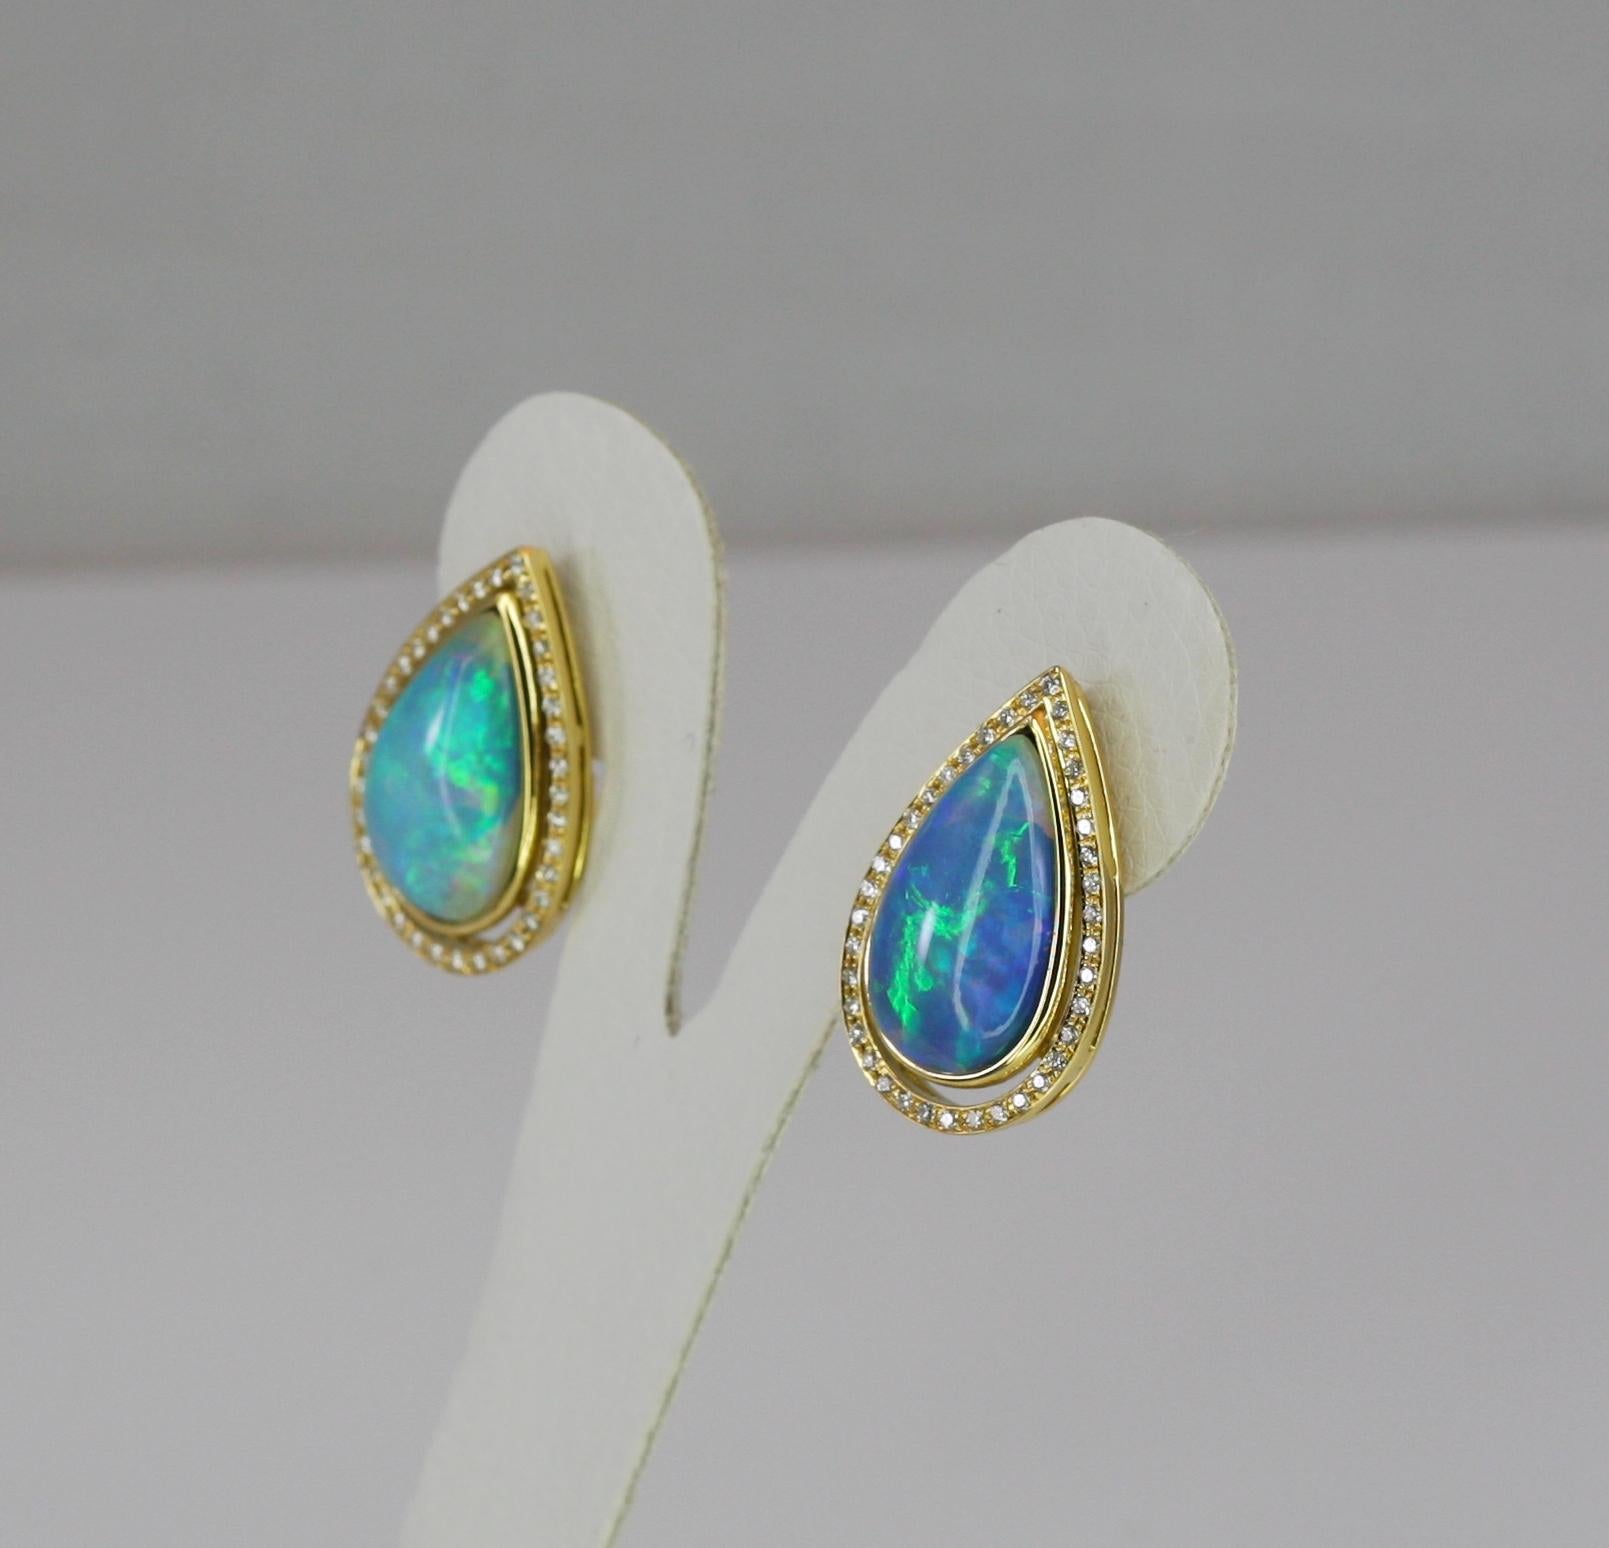 S.Georgios designer earrings are handmade 18 Karat Yellow Gold and feature a pear shape Australian Opals, both total weight of 11.54 Carat. These gorgeous and classic earrings also feature Brilliant cut white diamonds total weight of 0.65 Carat